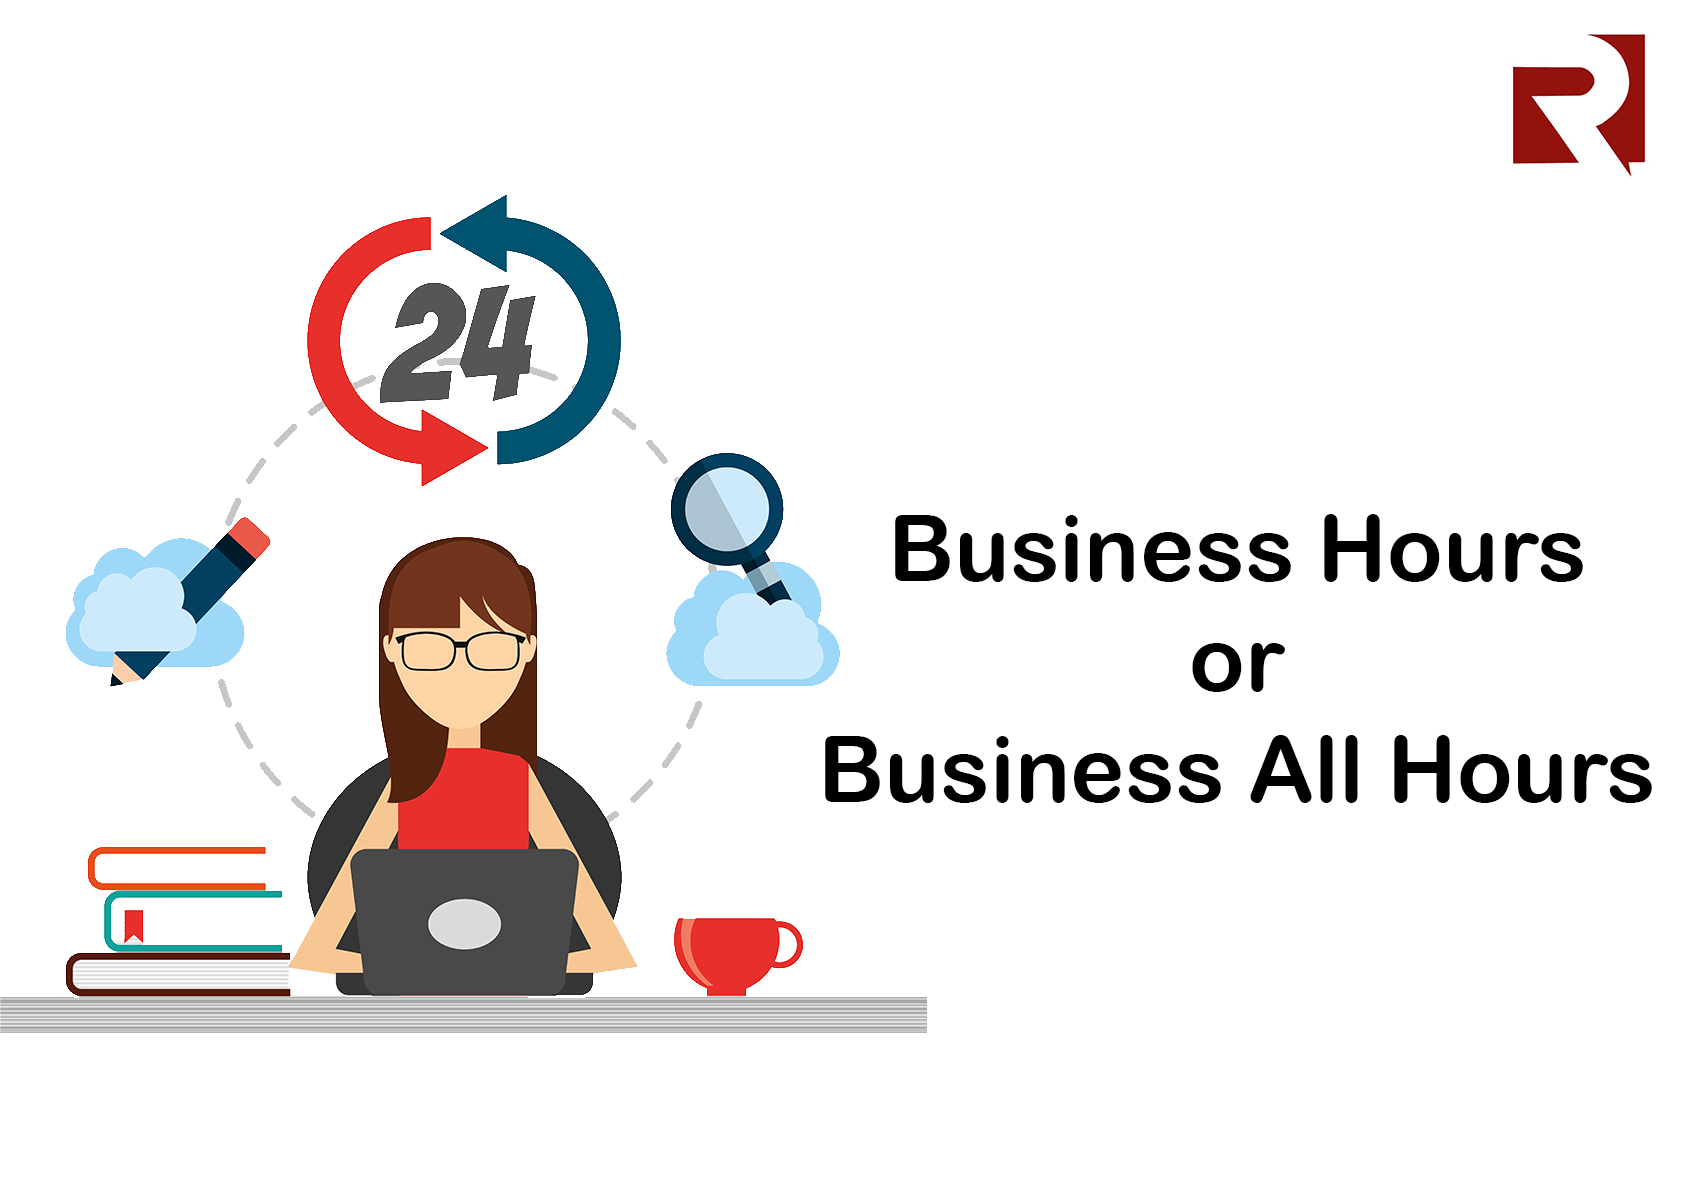 Business Hours or Business All Hours?